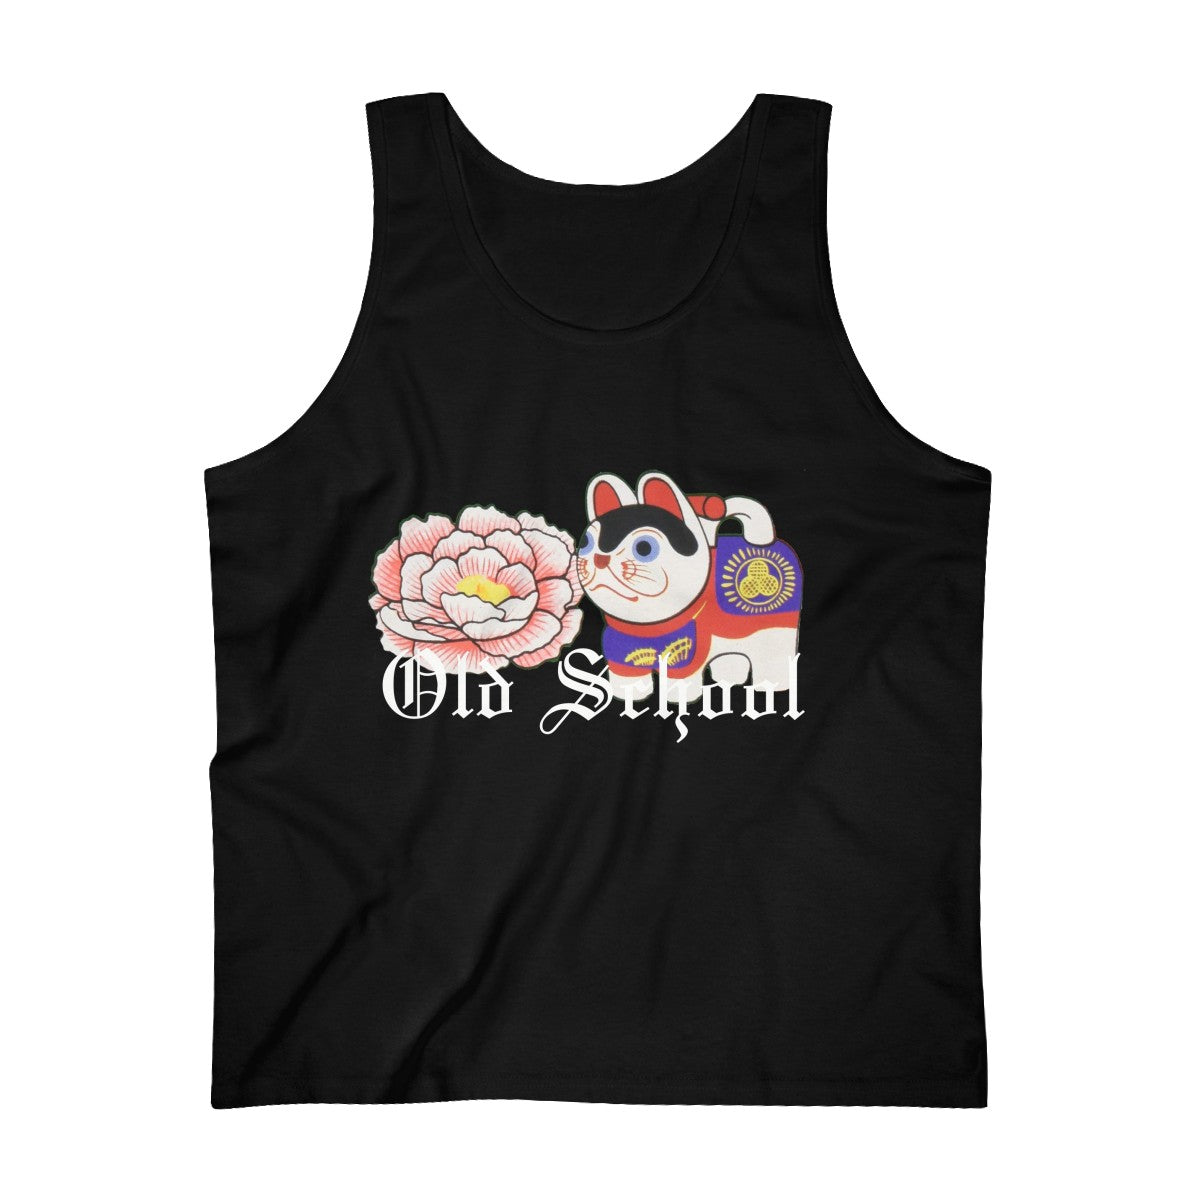 Old School Candy Men's Ultra Cotton Tank Top